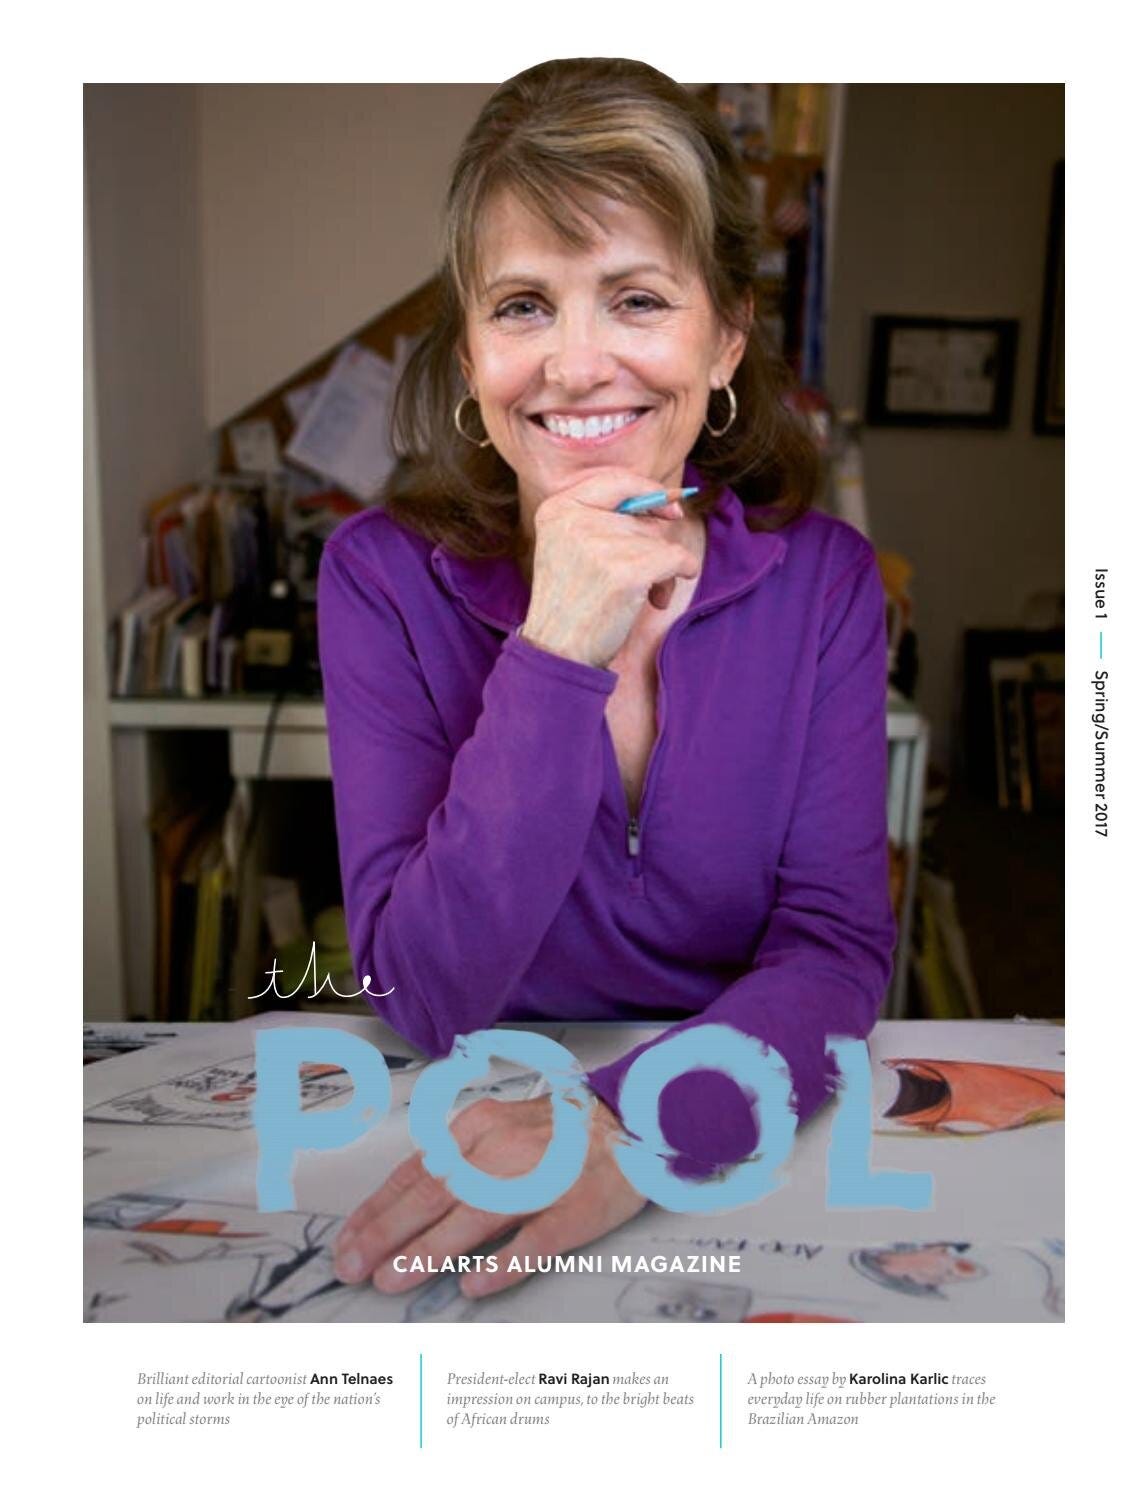 Click to read this edition of the CalArts Alumni Magazine with Ann featured.